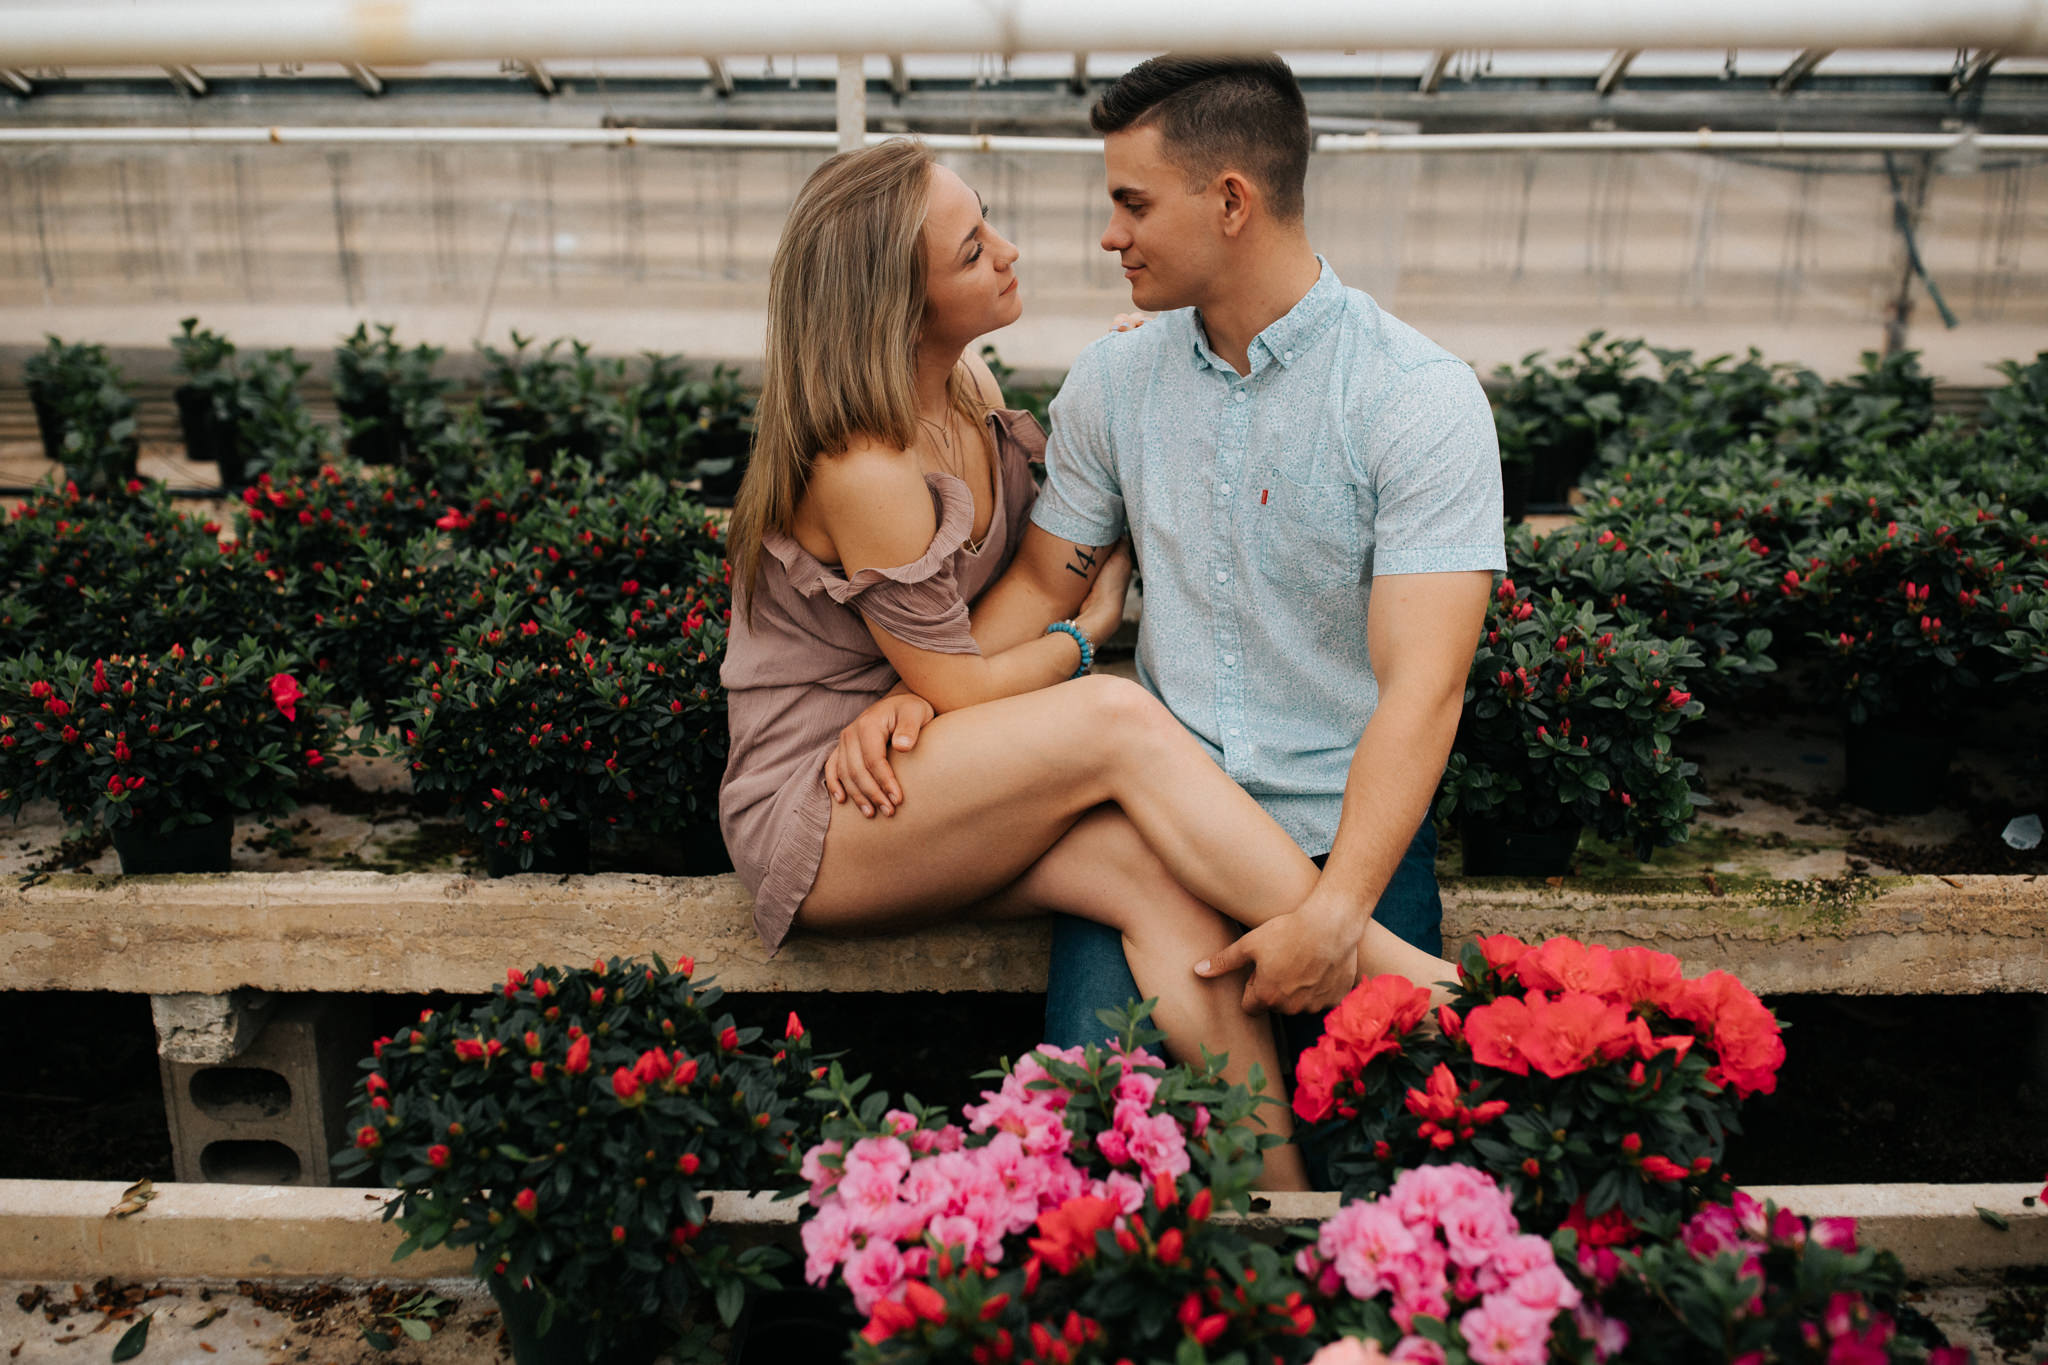 memphis-engagement-photographer-thewarmtharoundyou-greenhouse-engagement-pictures (104 of 118).jpg